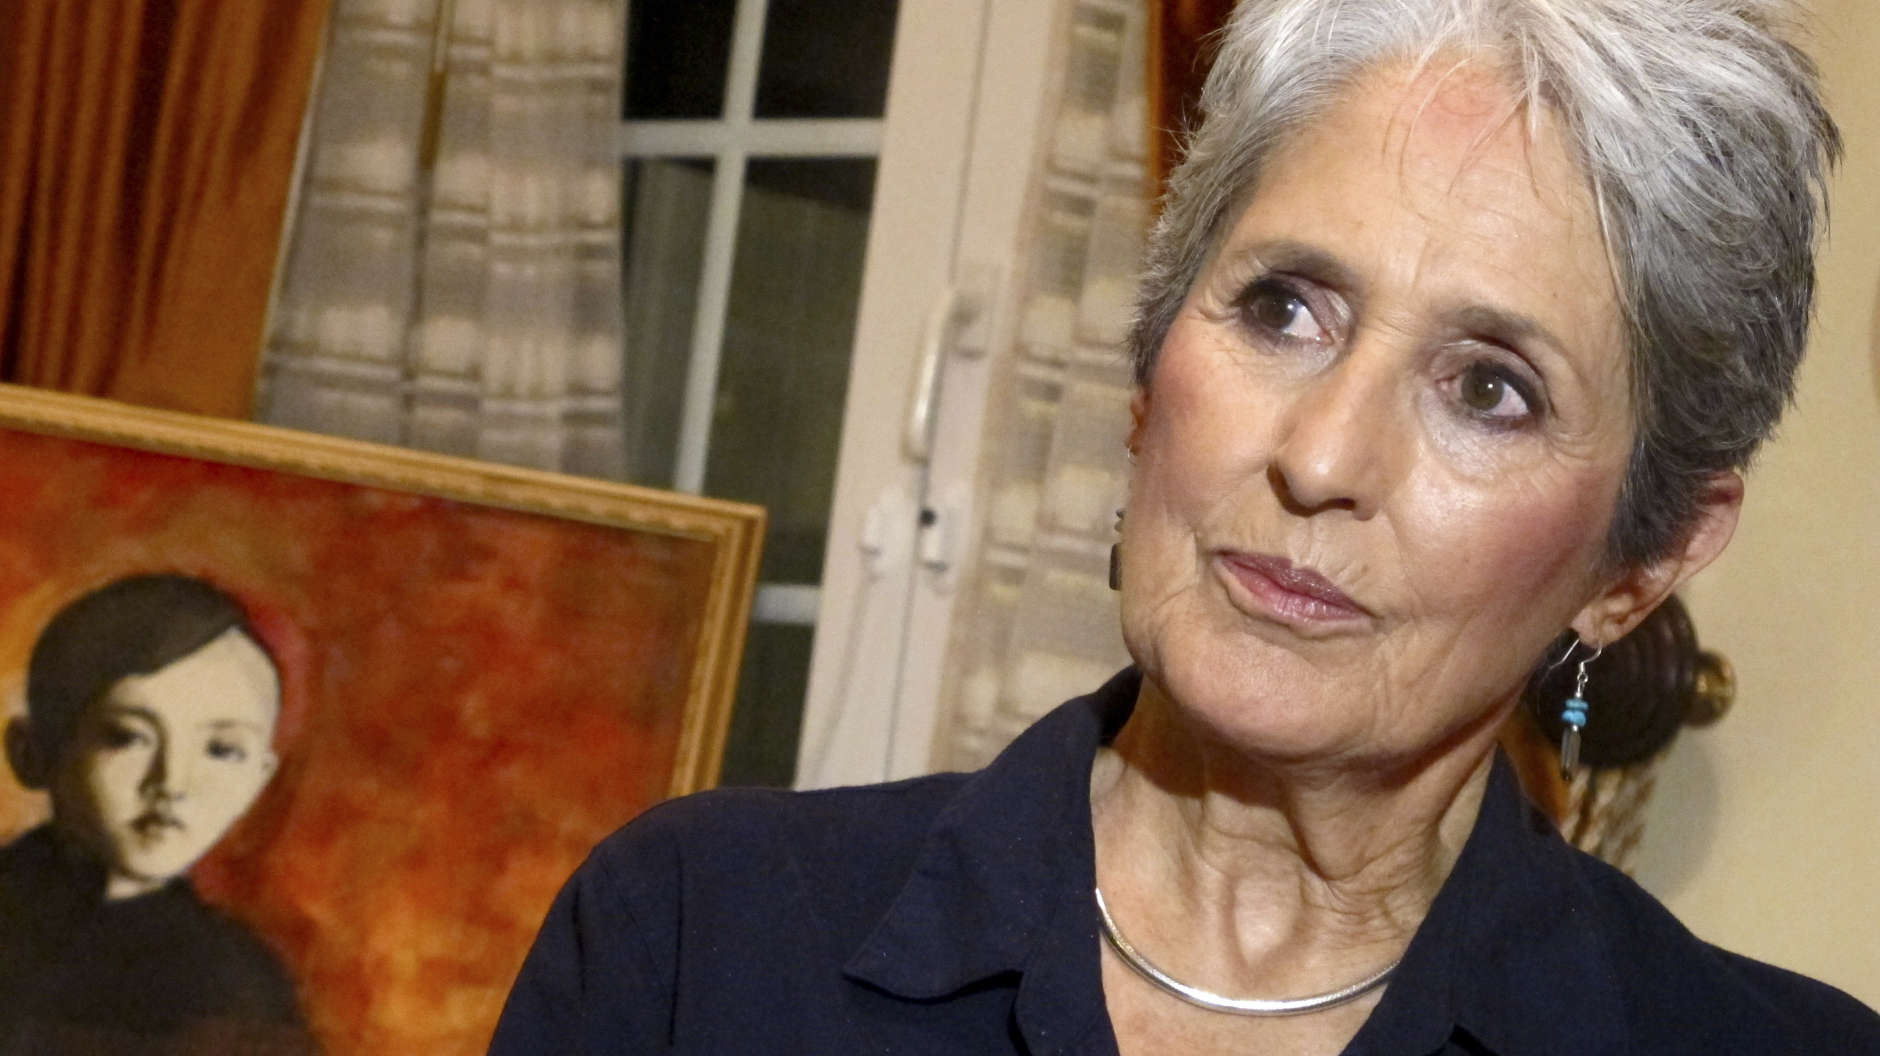 In this April 5, 2013 photo, Joan Baez speaks to a reporter in her hotel room in Hanoi, Vietnam. The folk singer and social activist visited Vietnam recently for the first time since she came to the country in December 1972 as part of an American peace delegation. Baez painted the picture of the young boy during her recent stay in Hanoi.  (AP Photo/Dinh Hau)